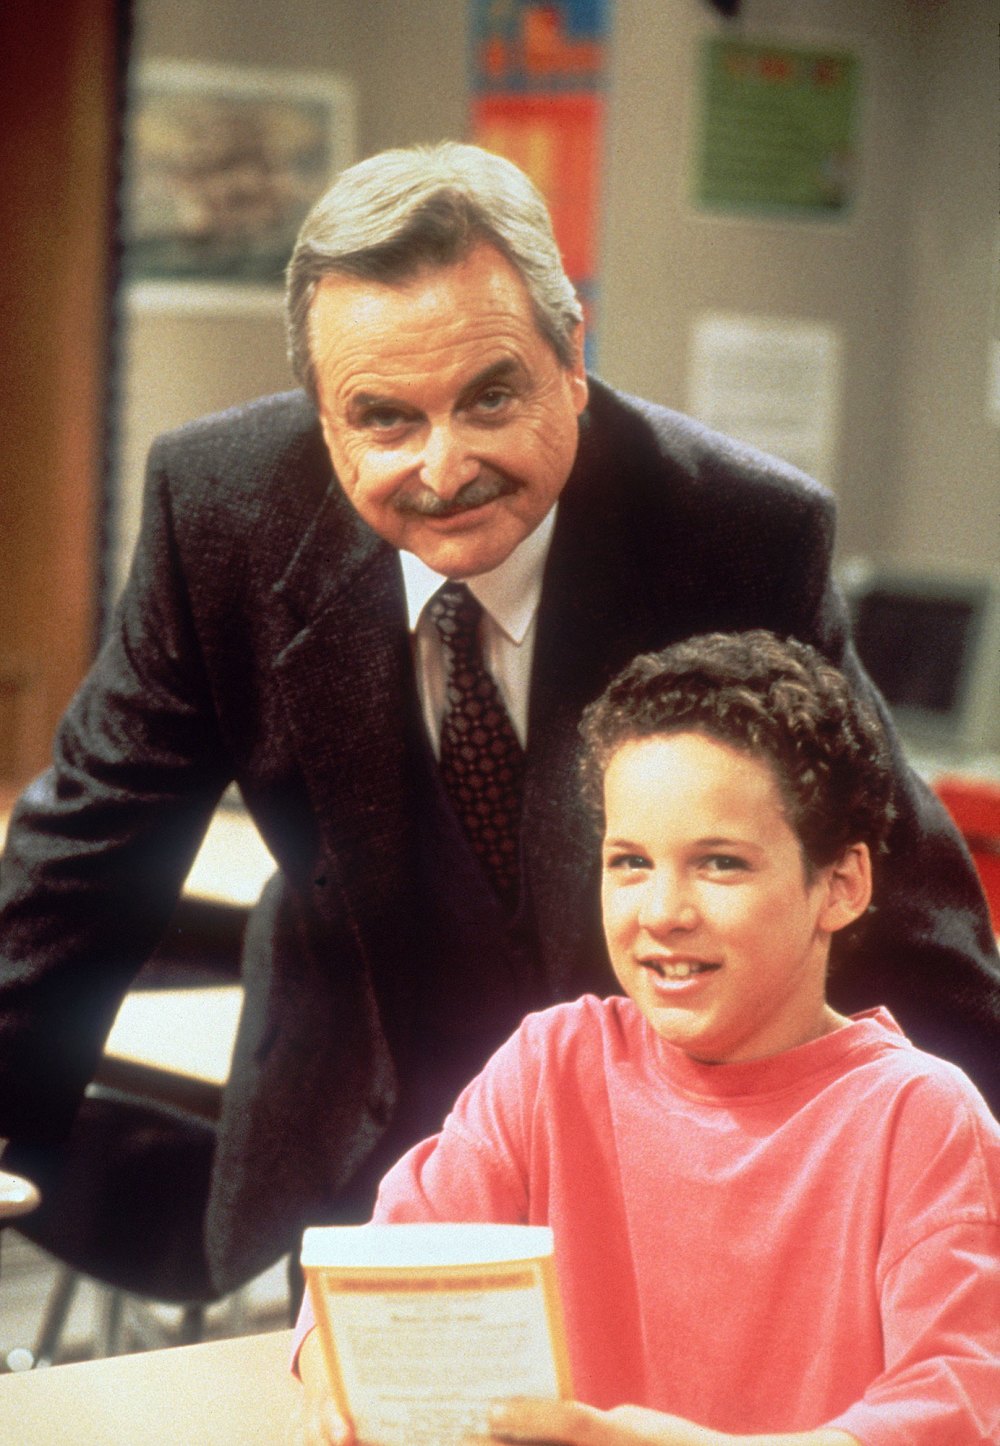 Boy Meets World’s William Daniels to Return as Mr. Feeny in Girl Meets World Pilot